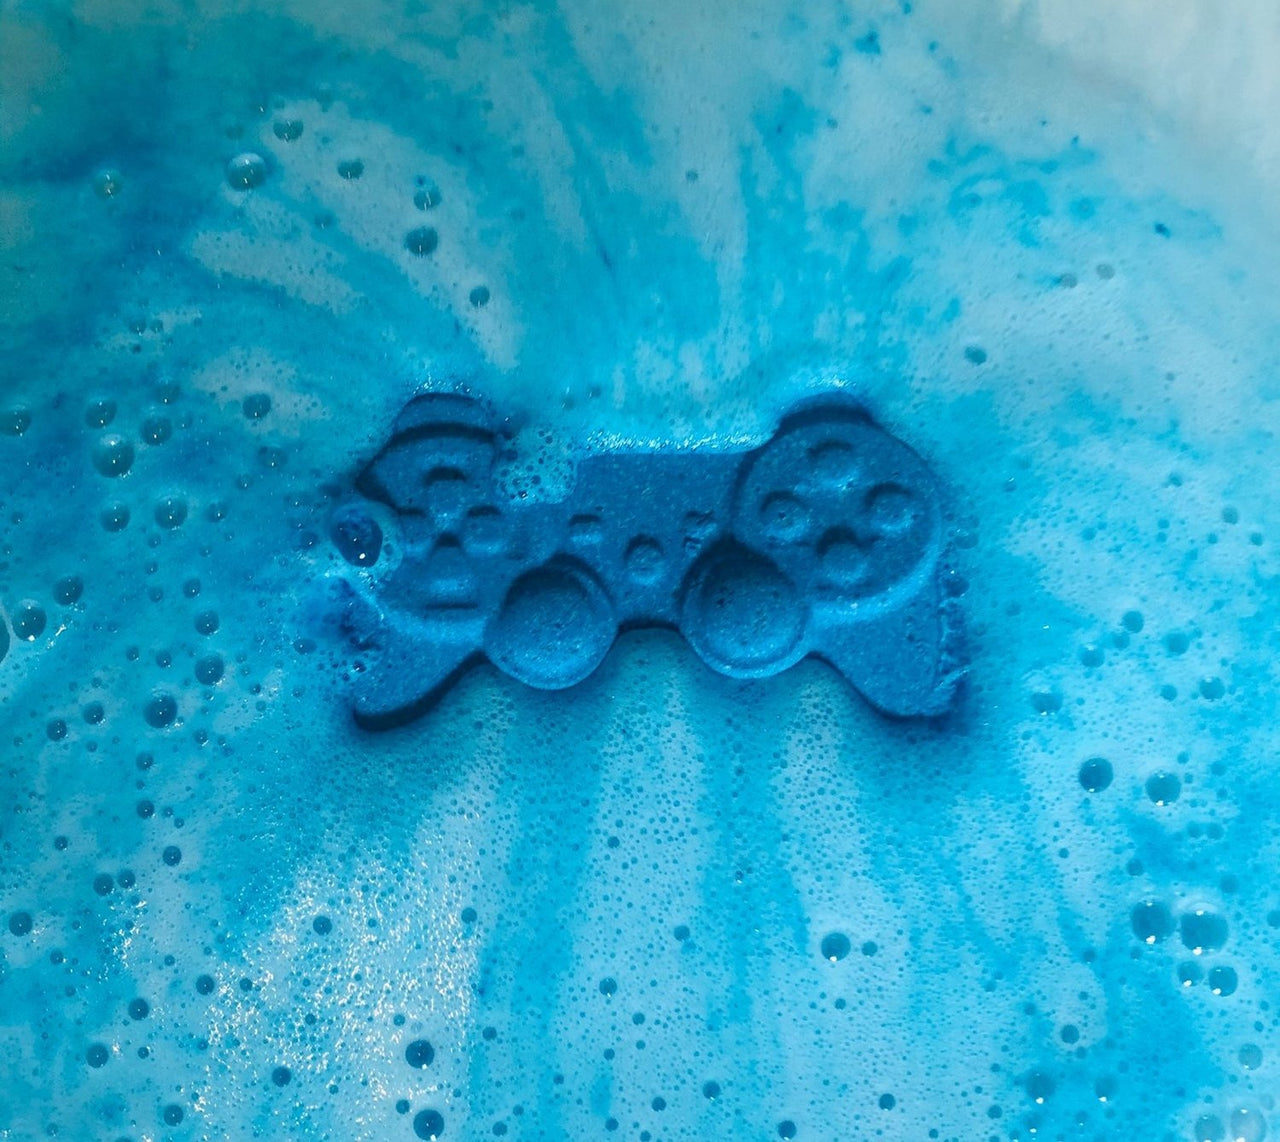 Game Controller Bath Bomb Lather Up UK